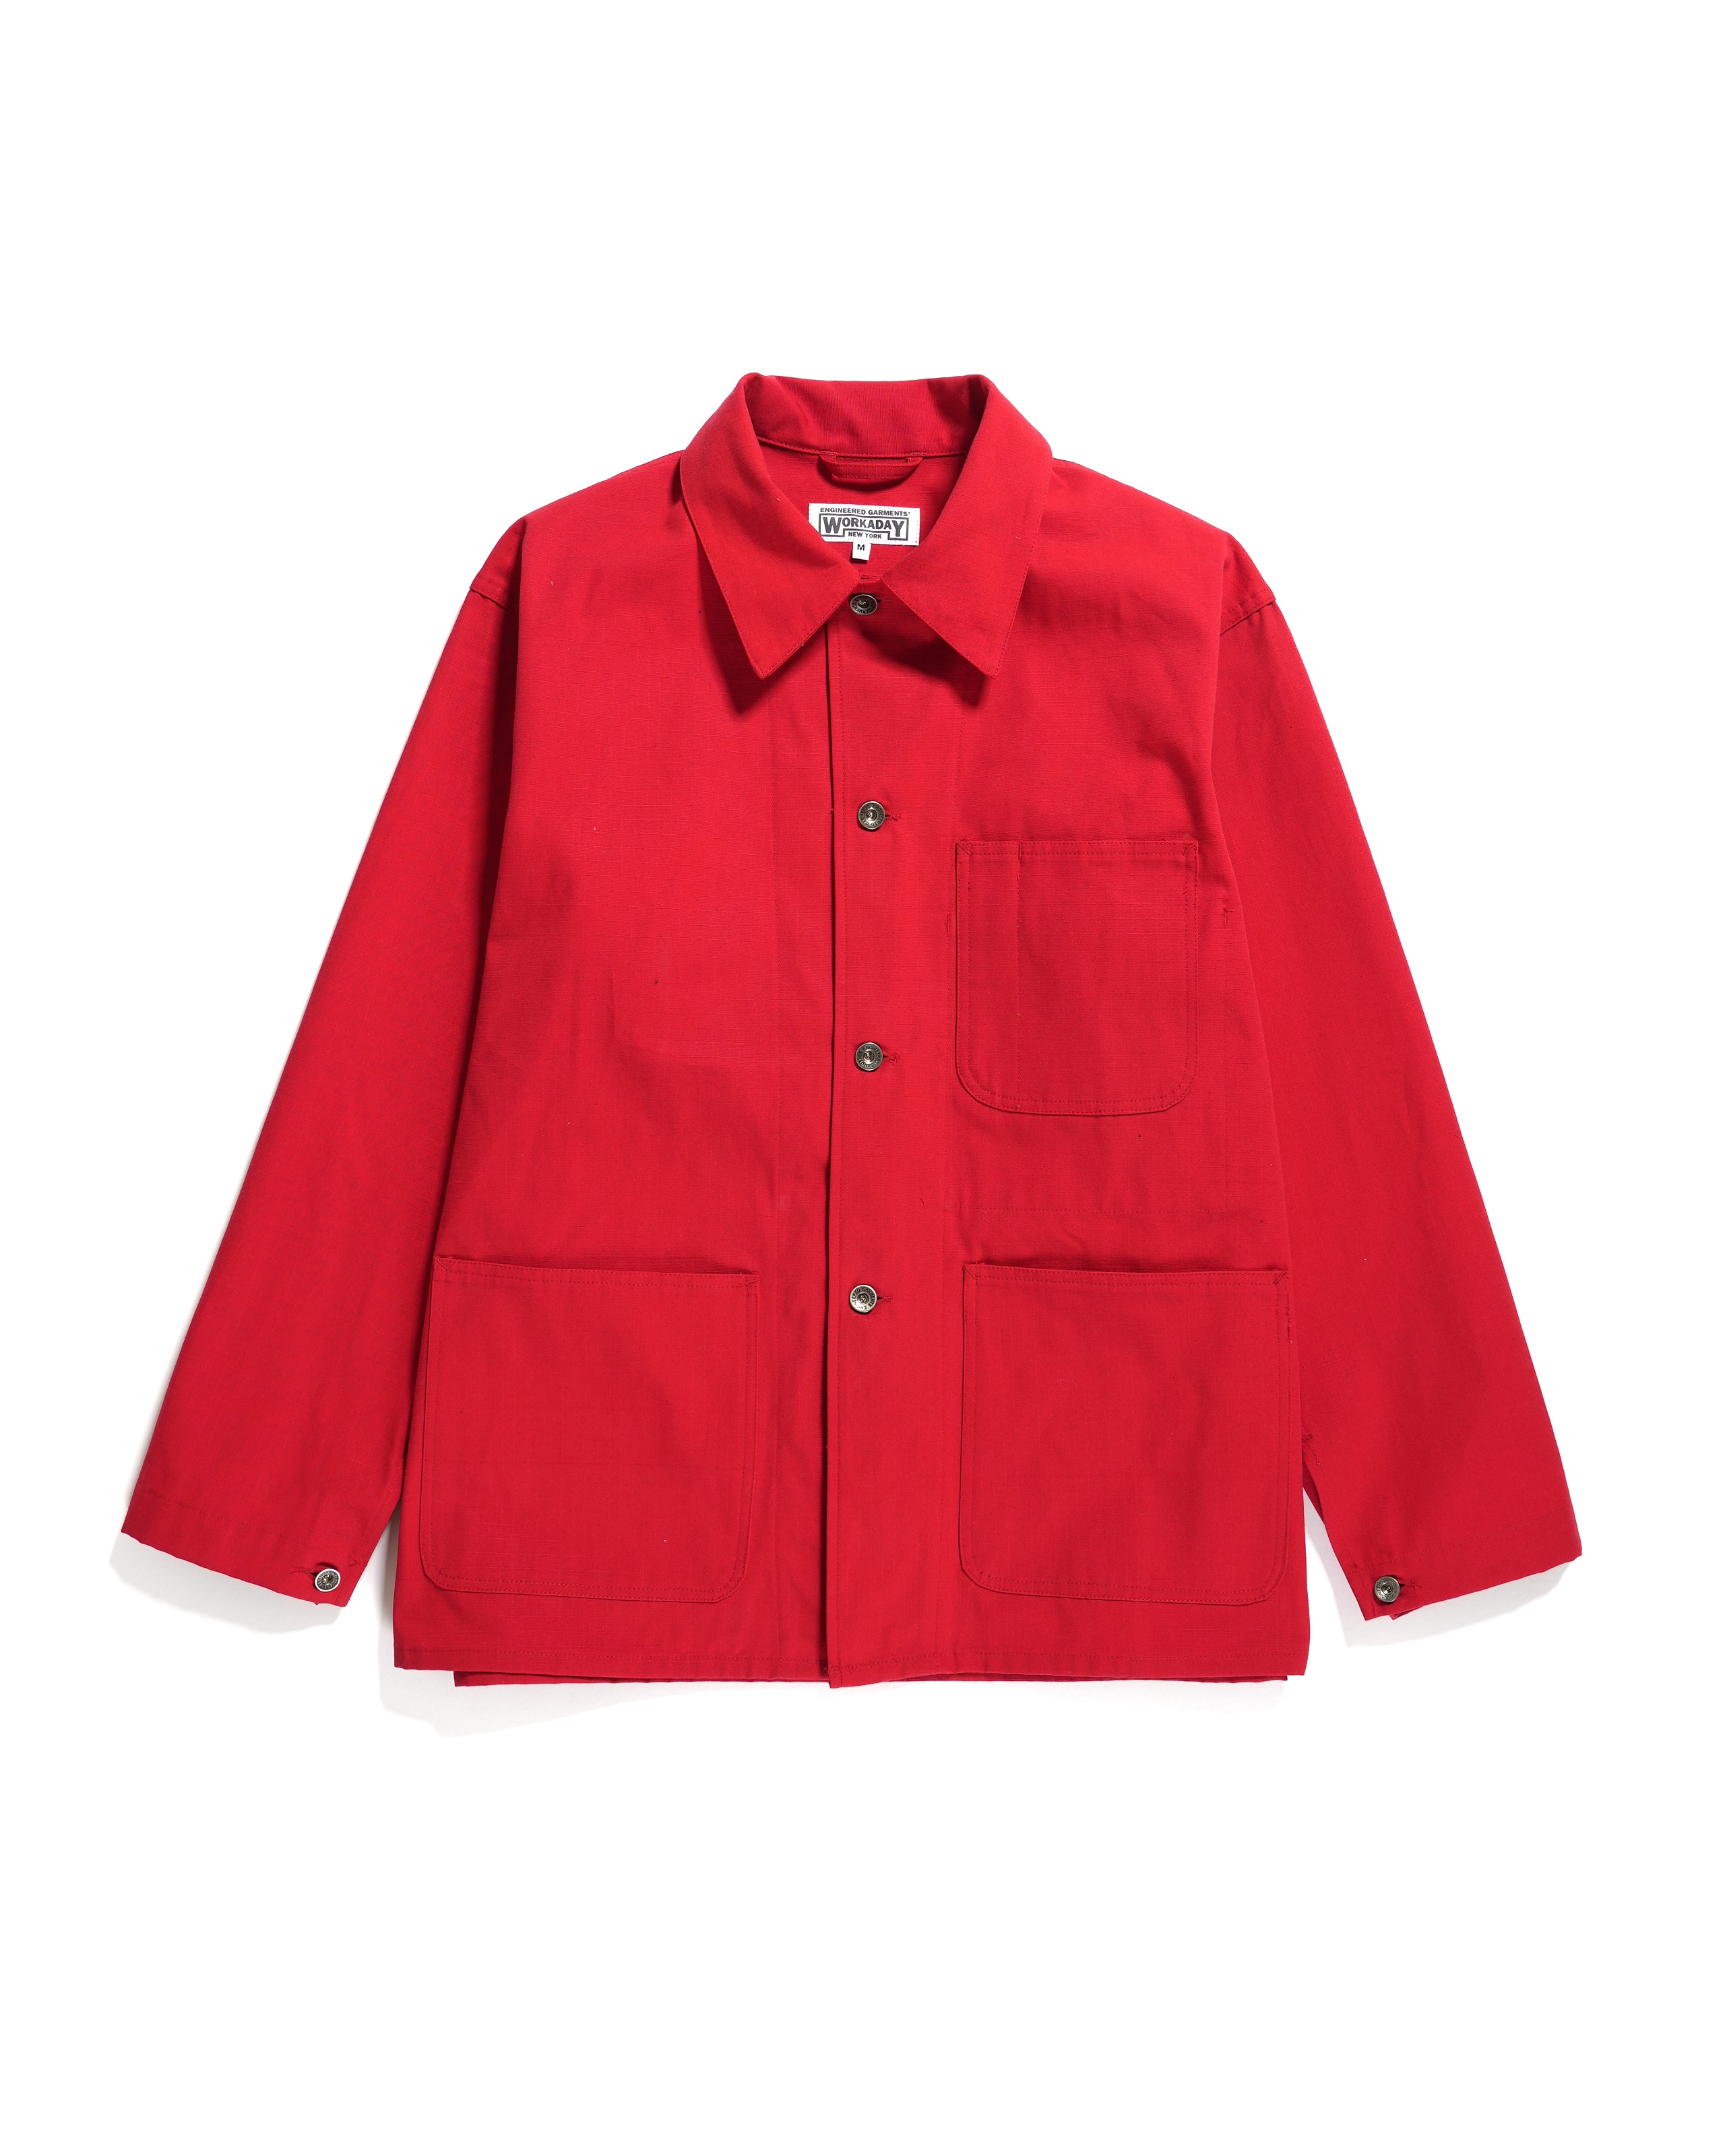 Utility Jacket - Red Heavyweight Cotton Ripstop